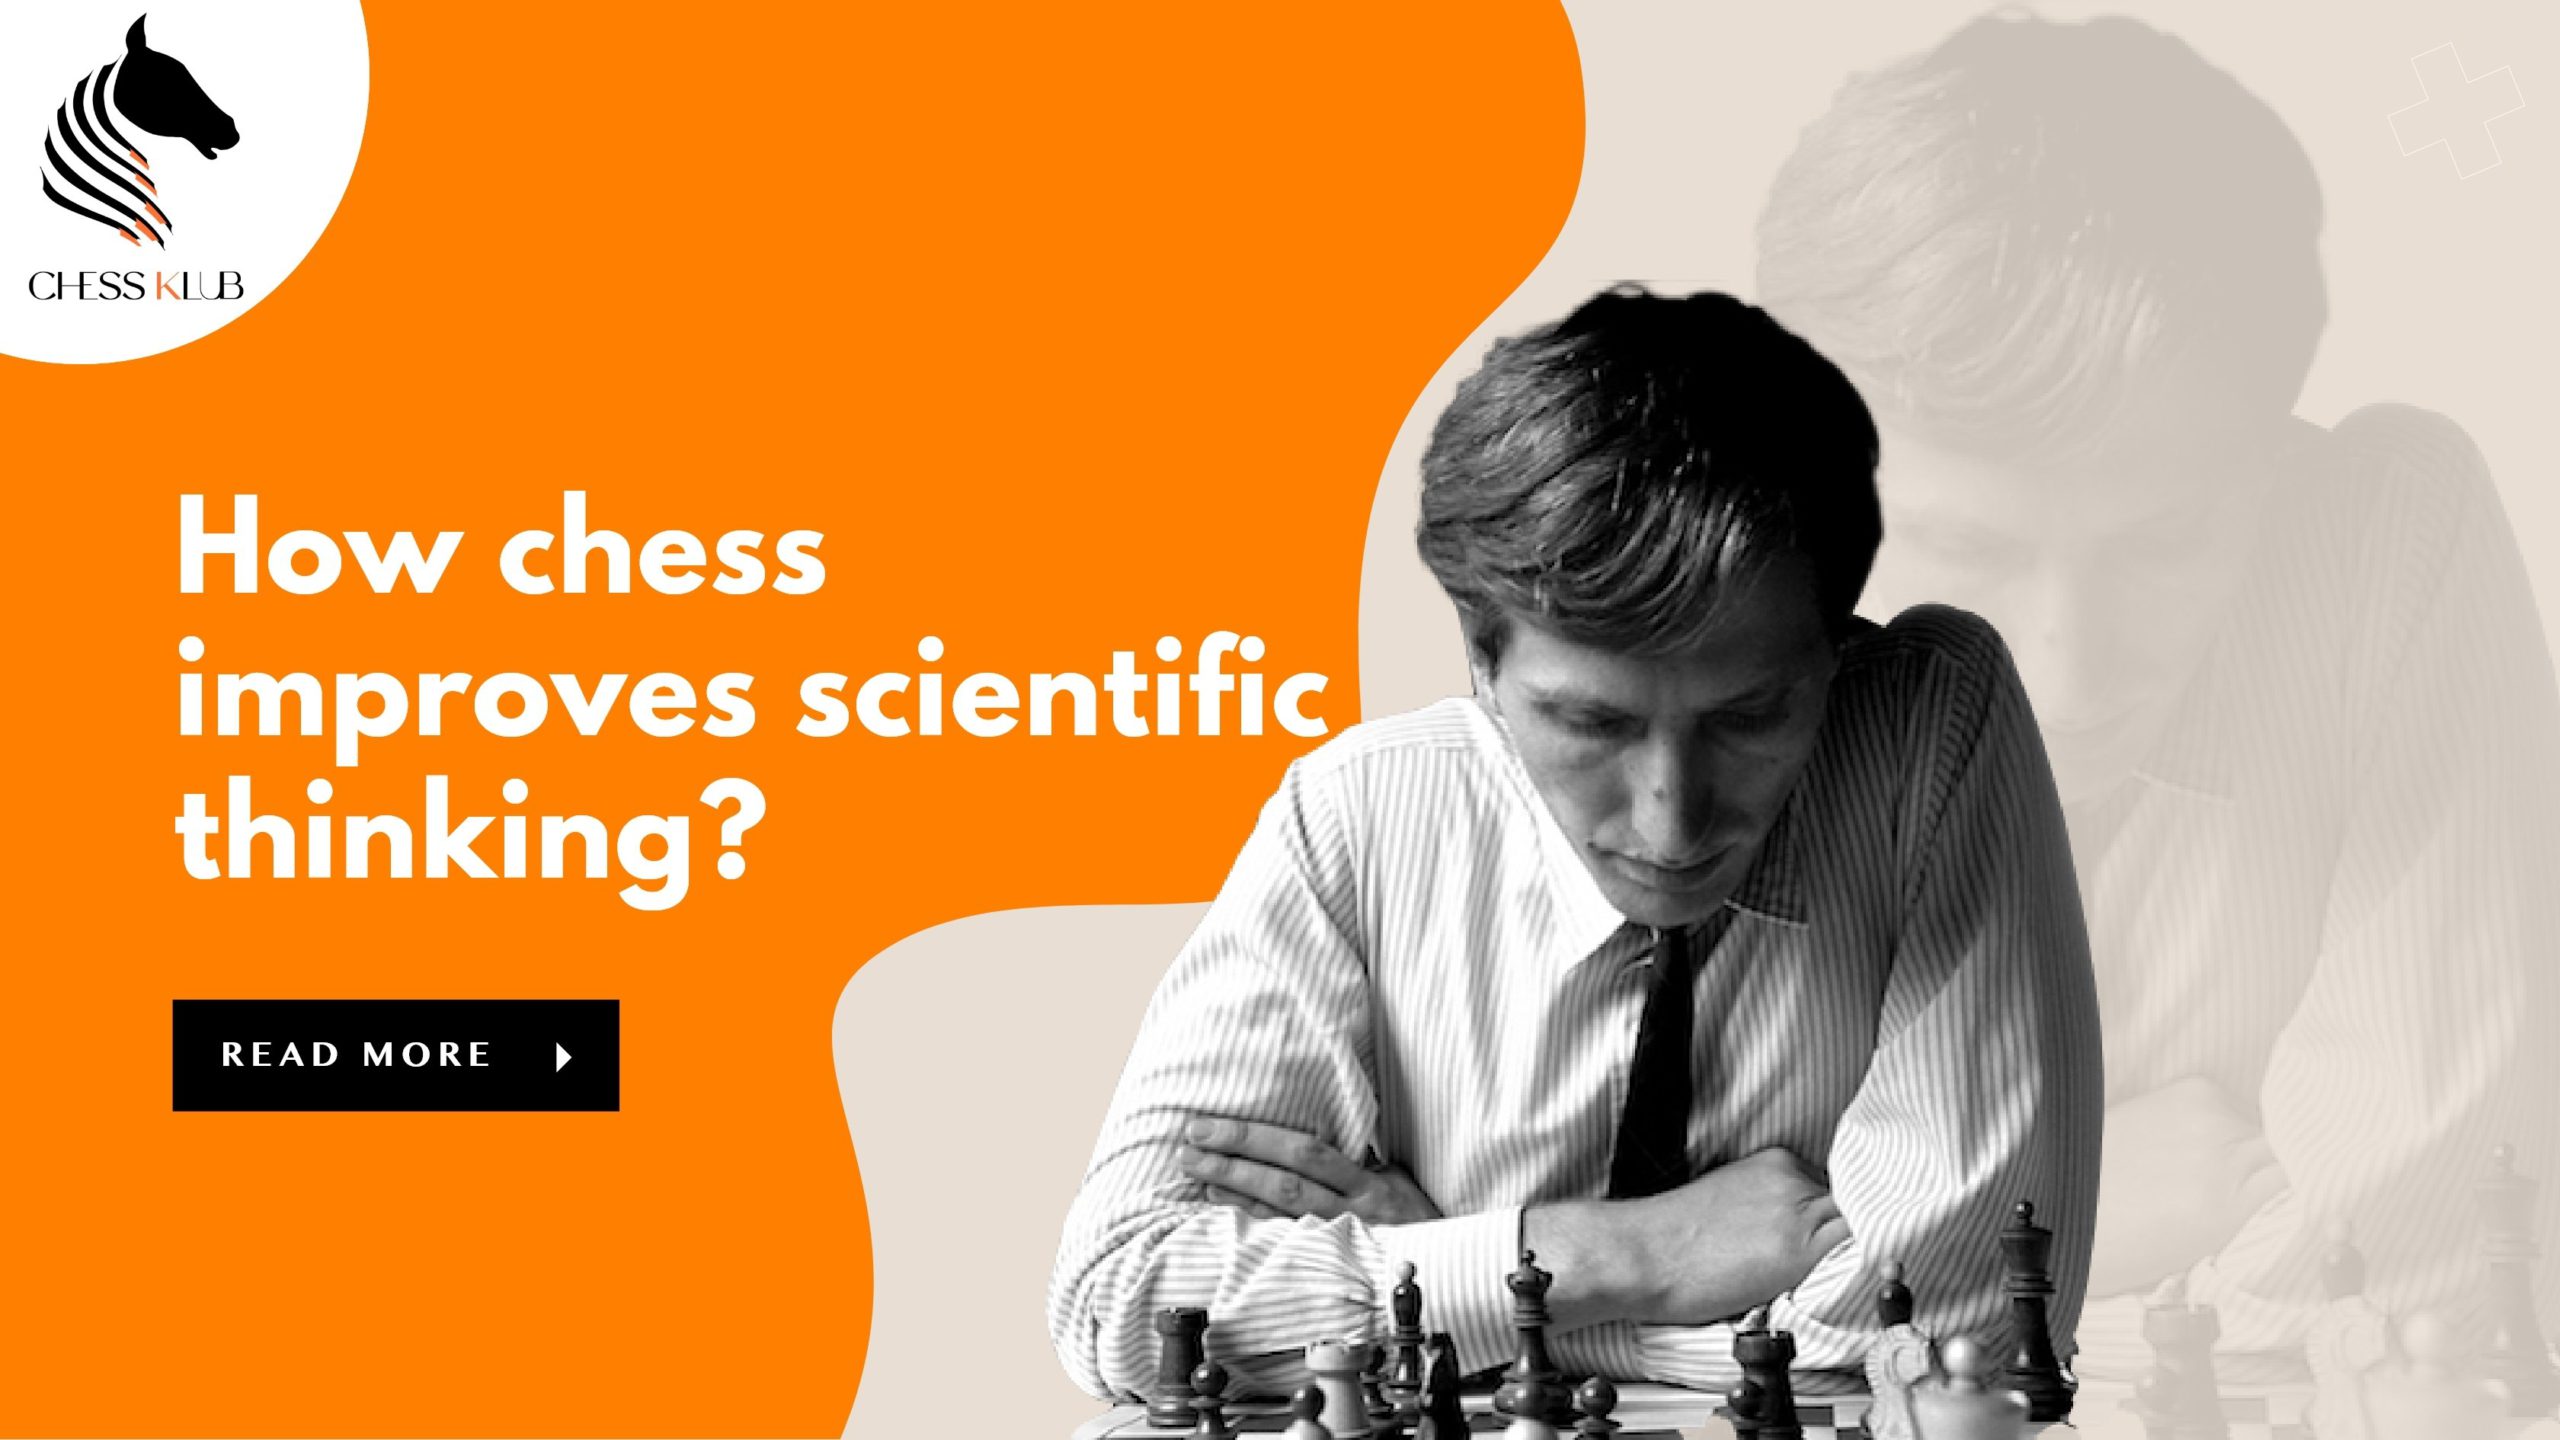 Evolution of Chess as a Science